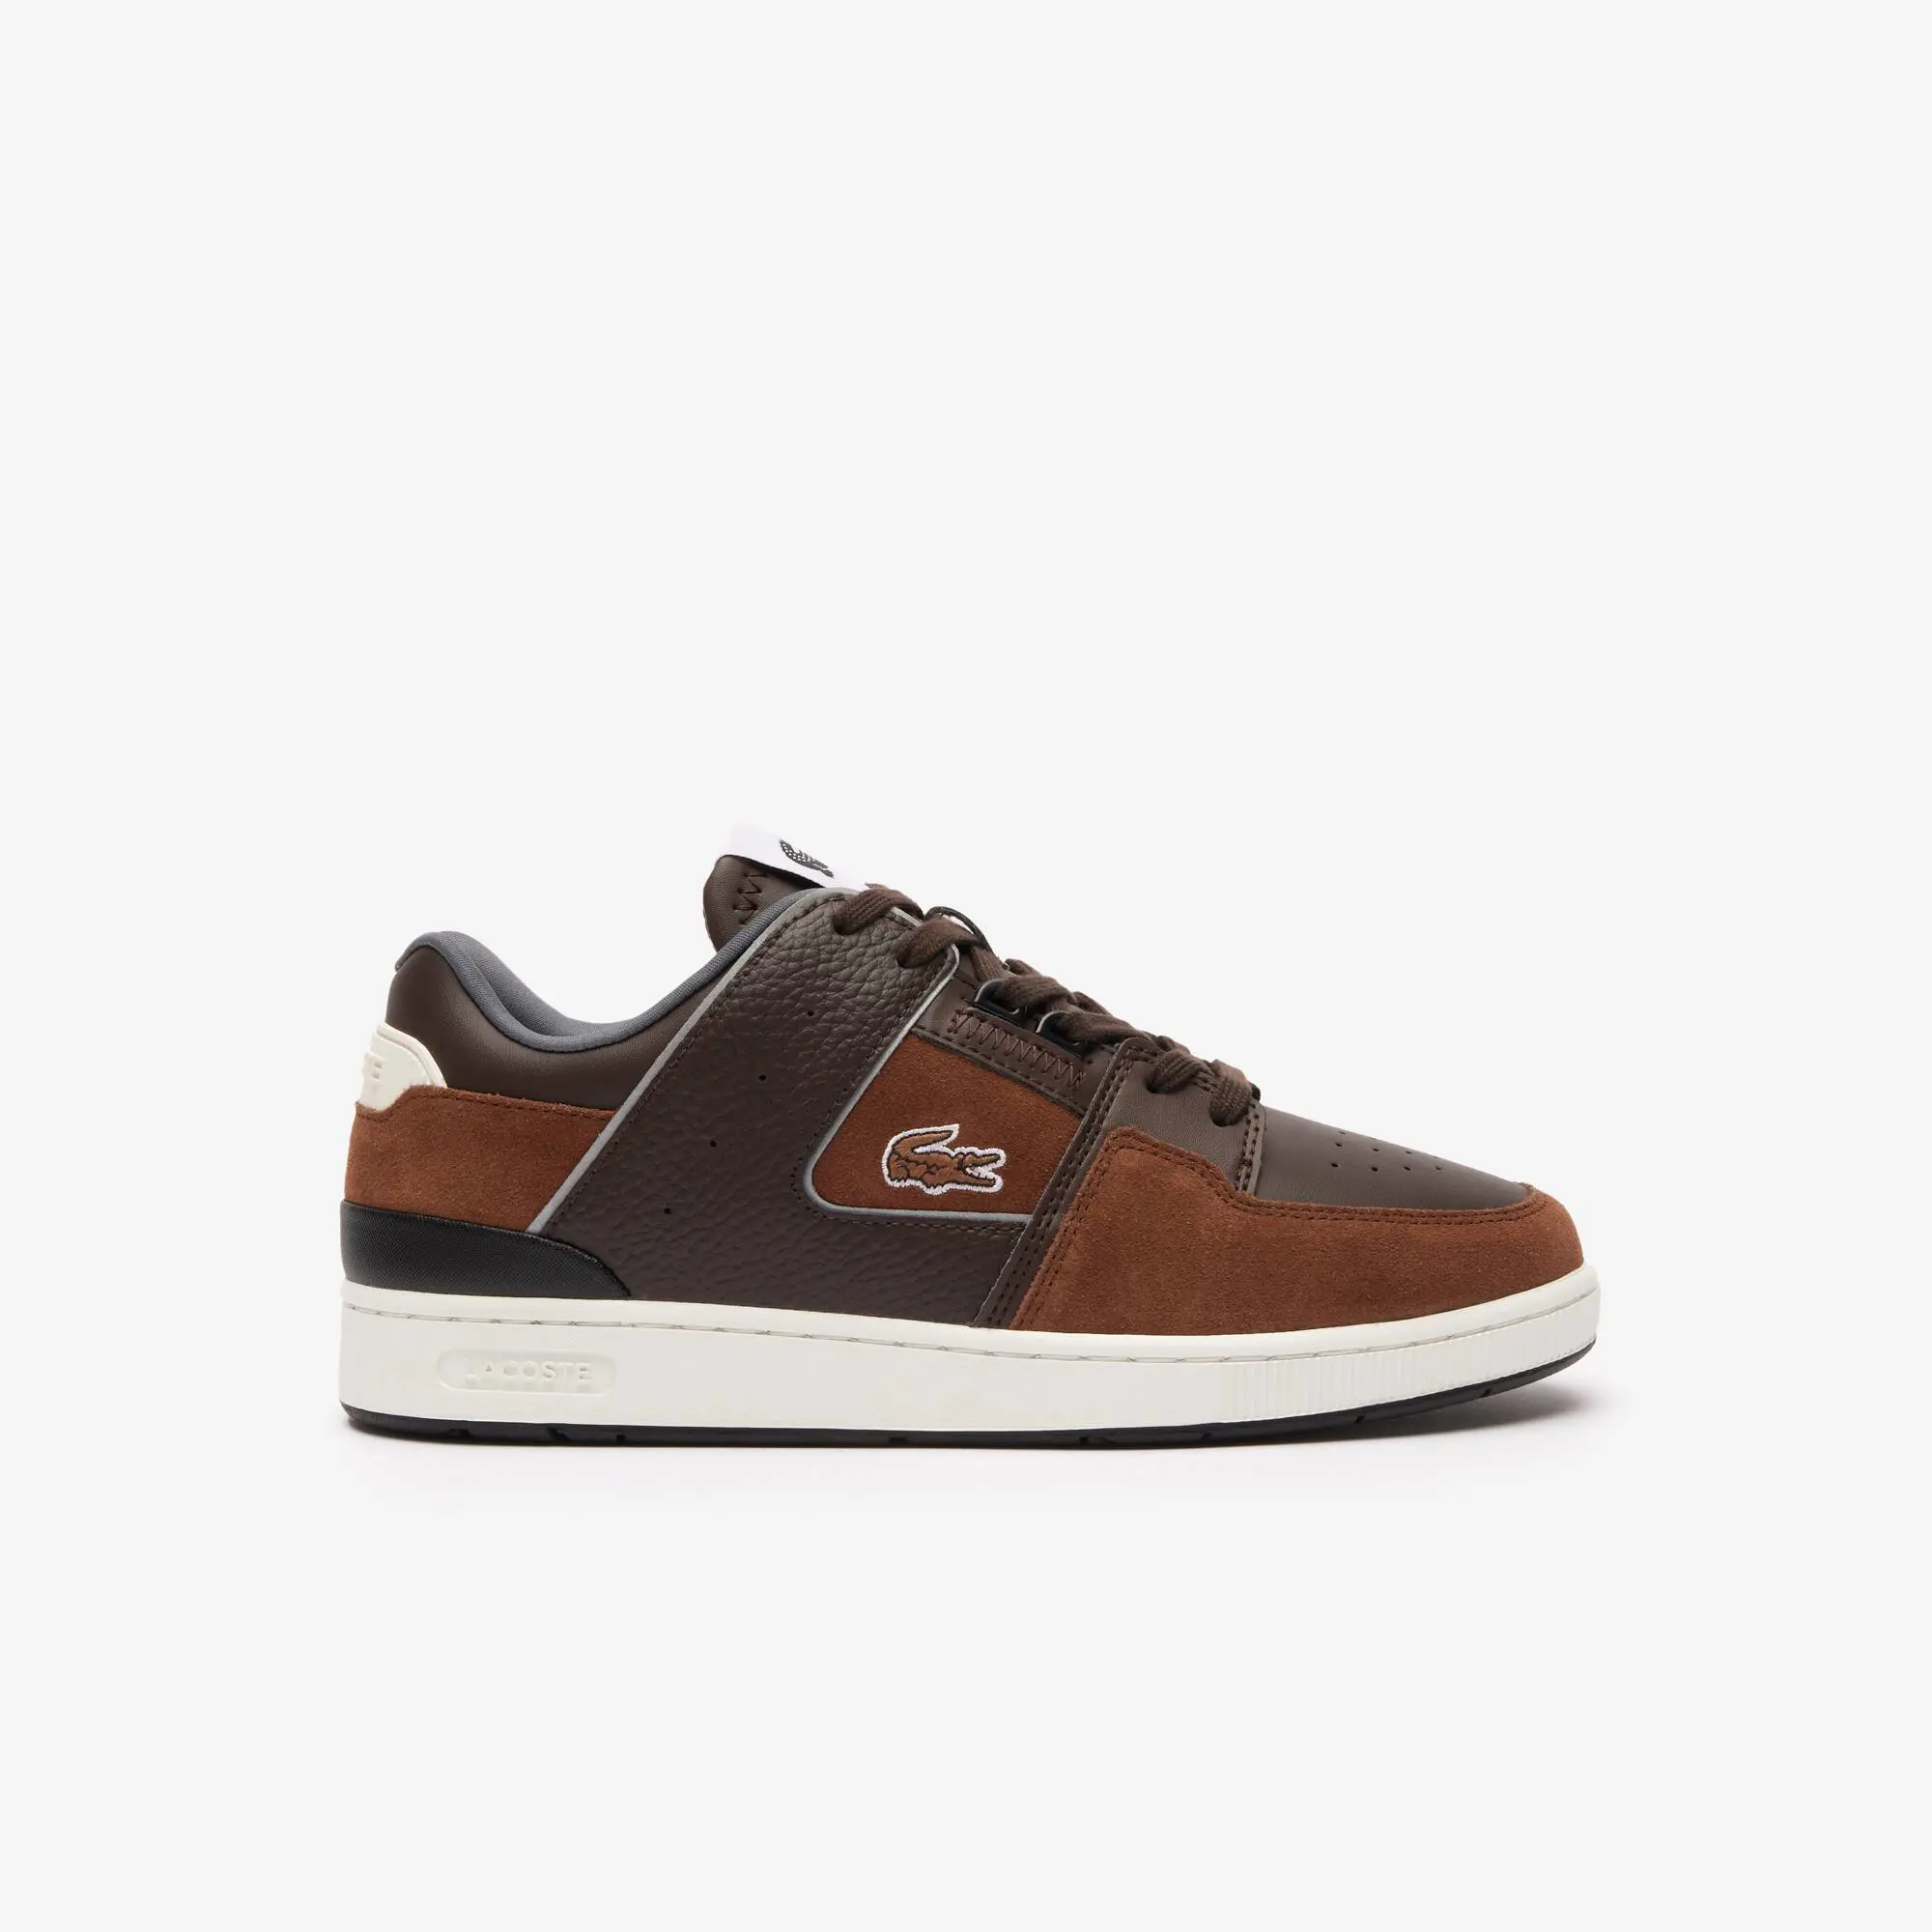 Lacoste Men's Court Cage Mixed Material Trainers. 1